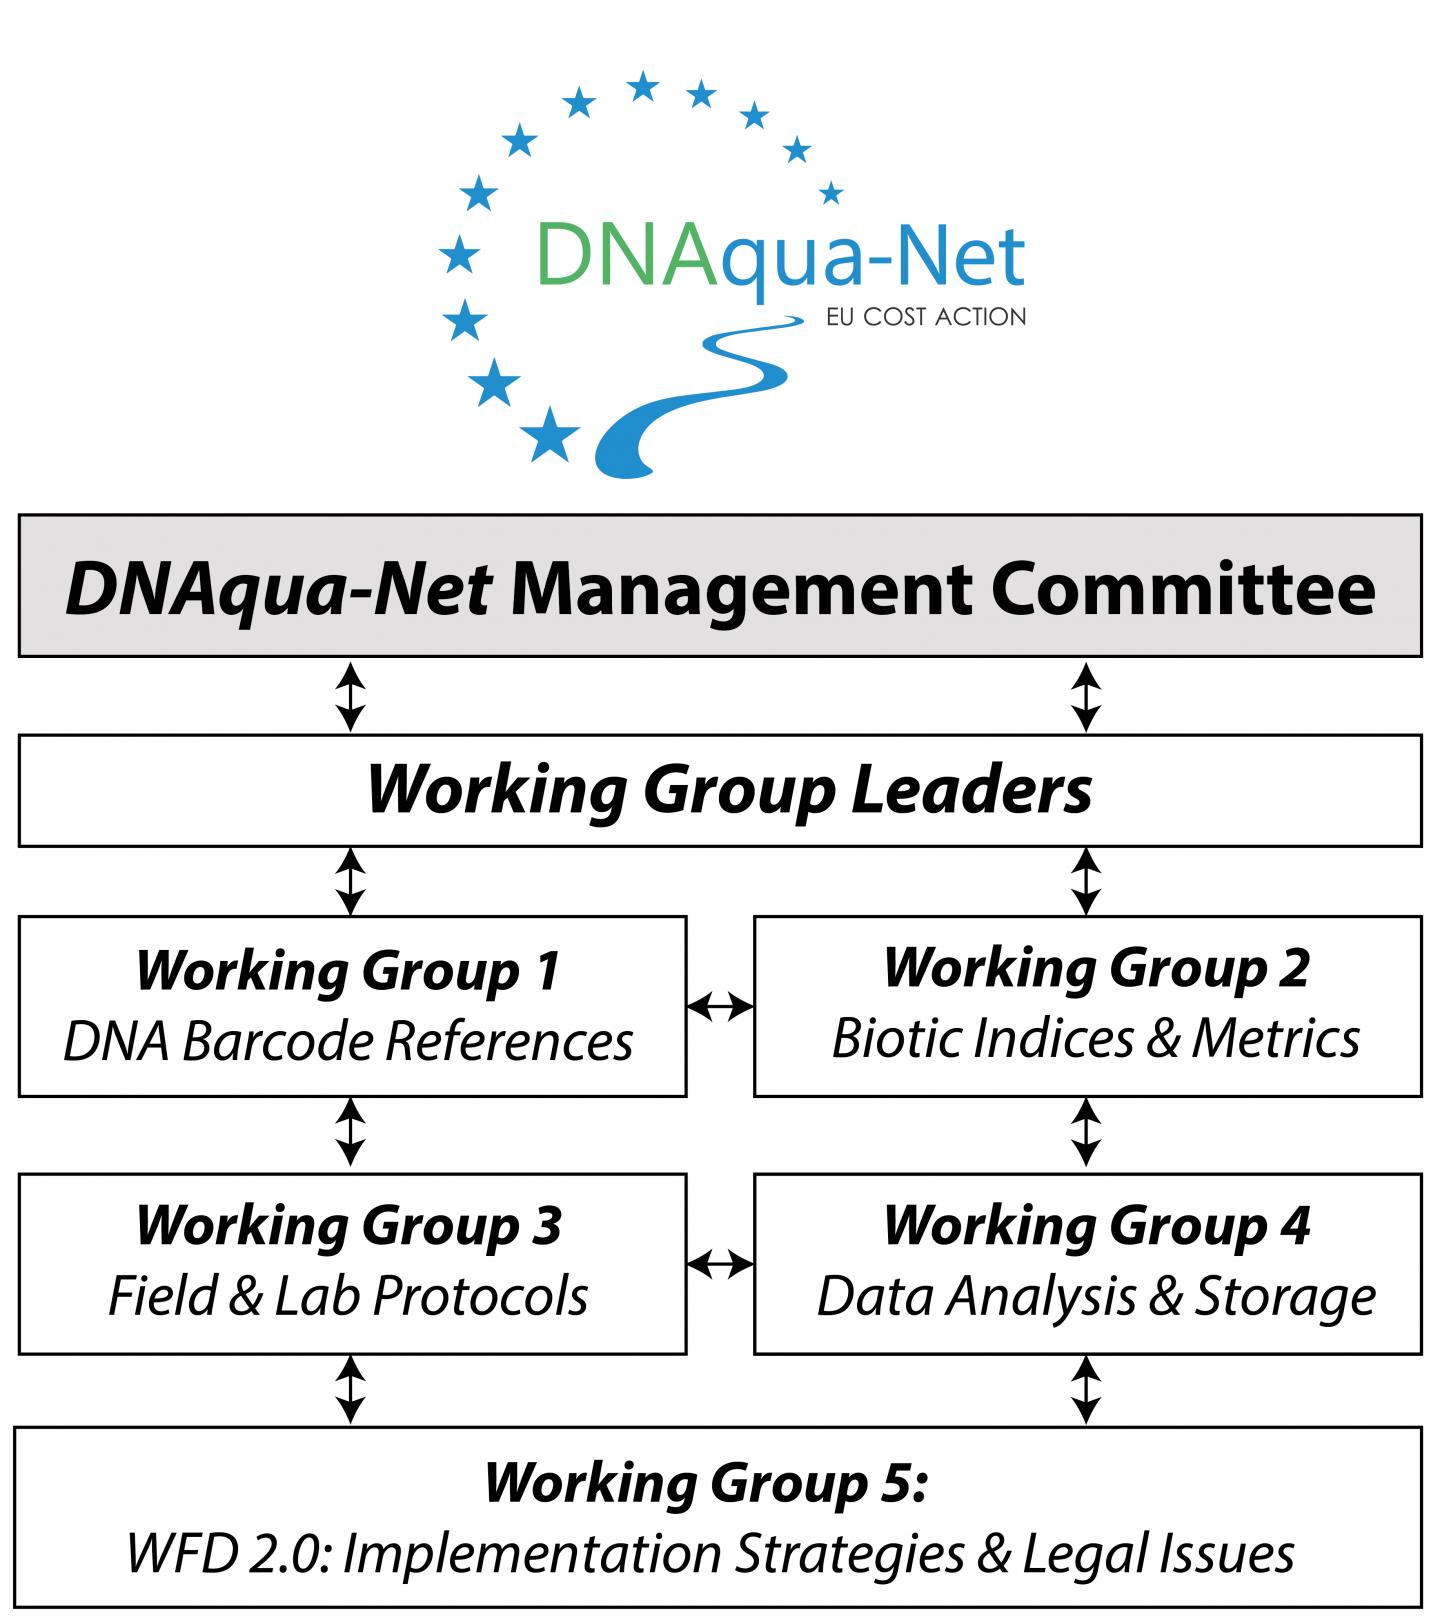 Overview of the Structure of DNAqua-Net